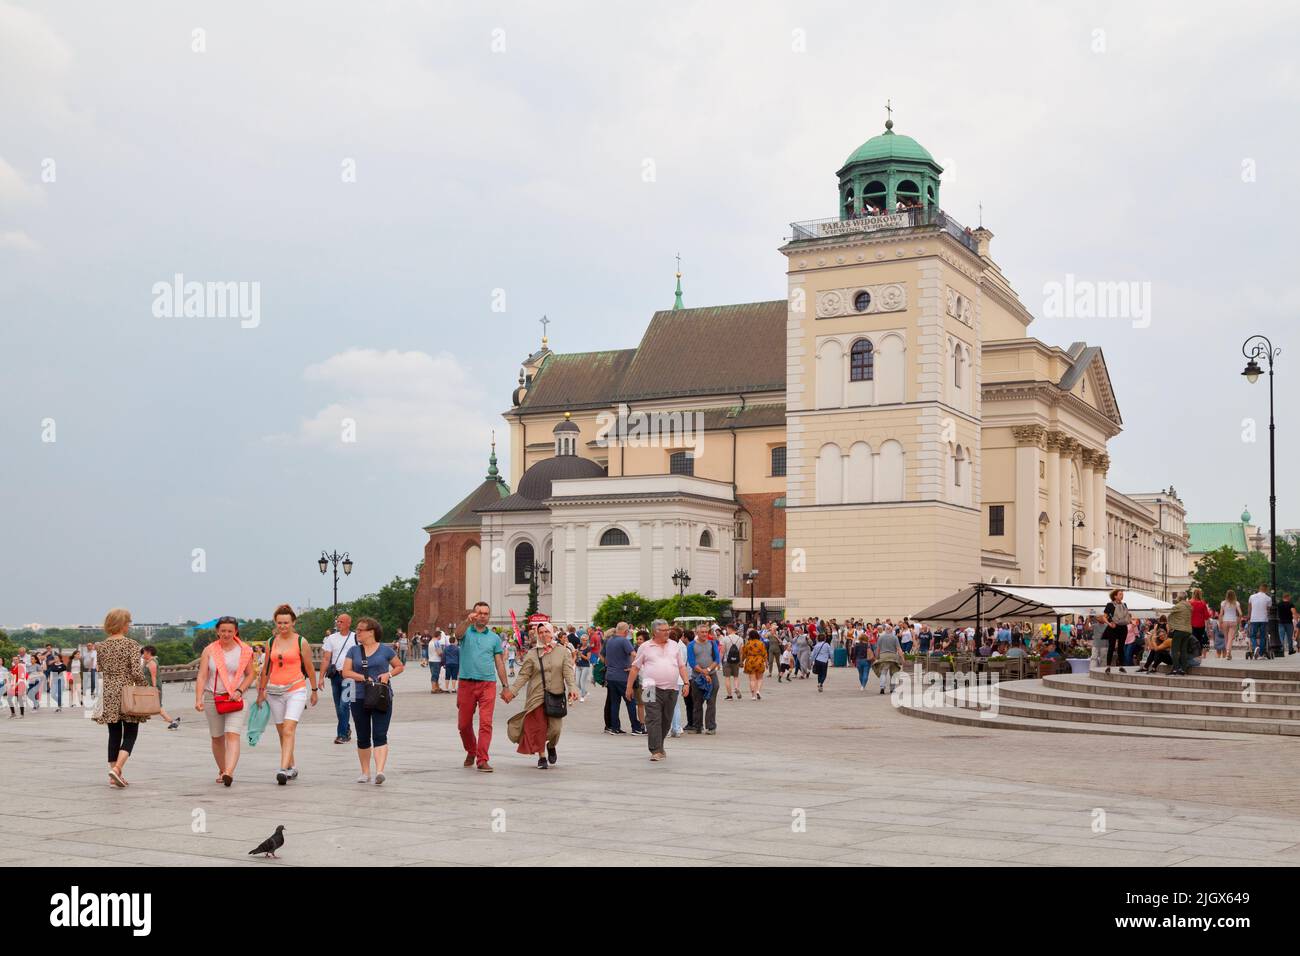 Warsaw, Poland - June 08 2019: St. Anne's Church is a church in the historic center adjacent to the Castle Square. Stock Photo